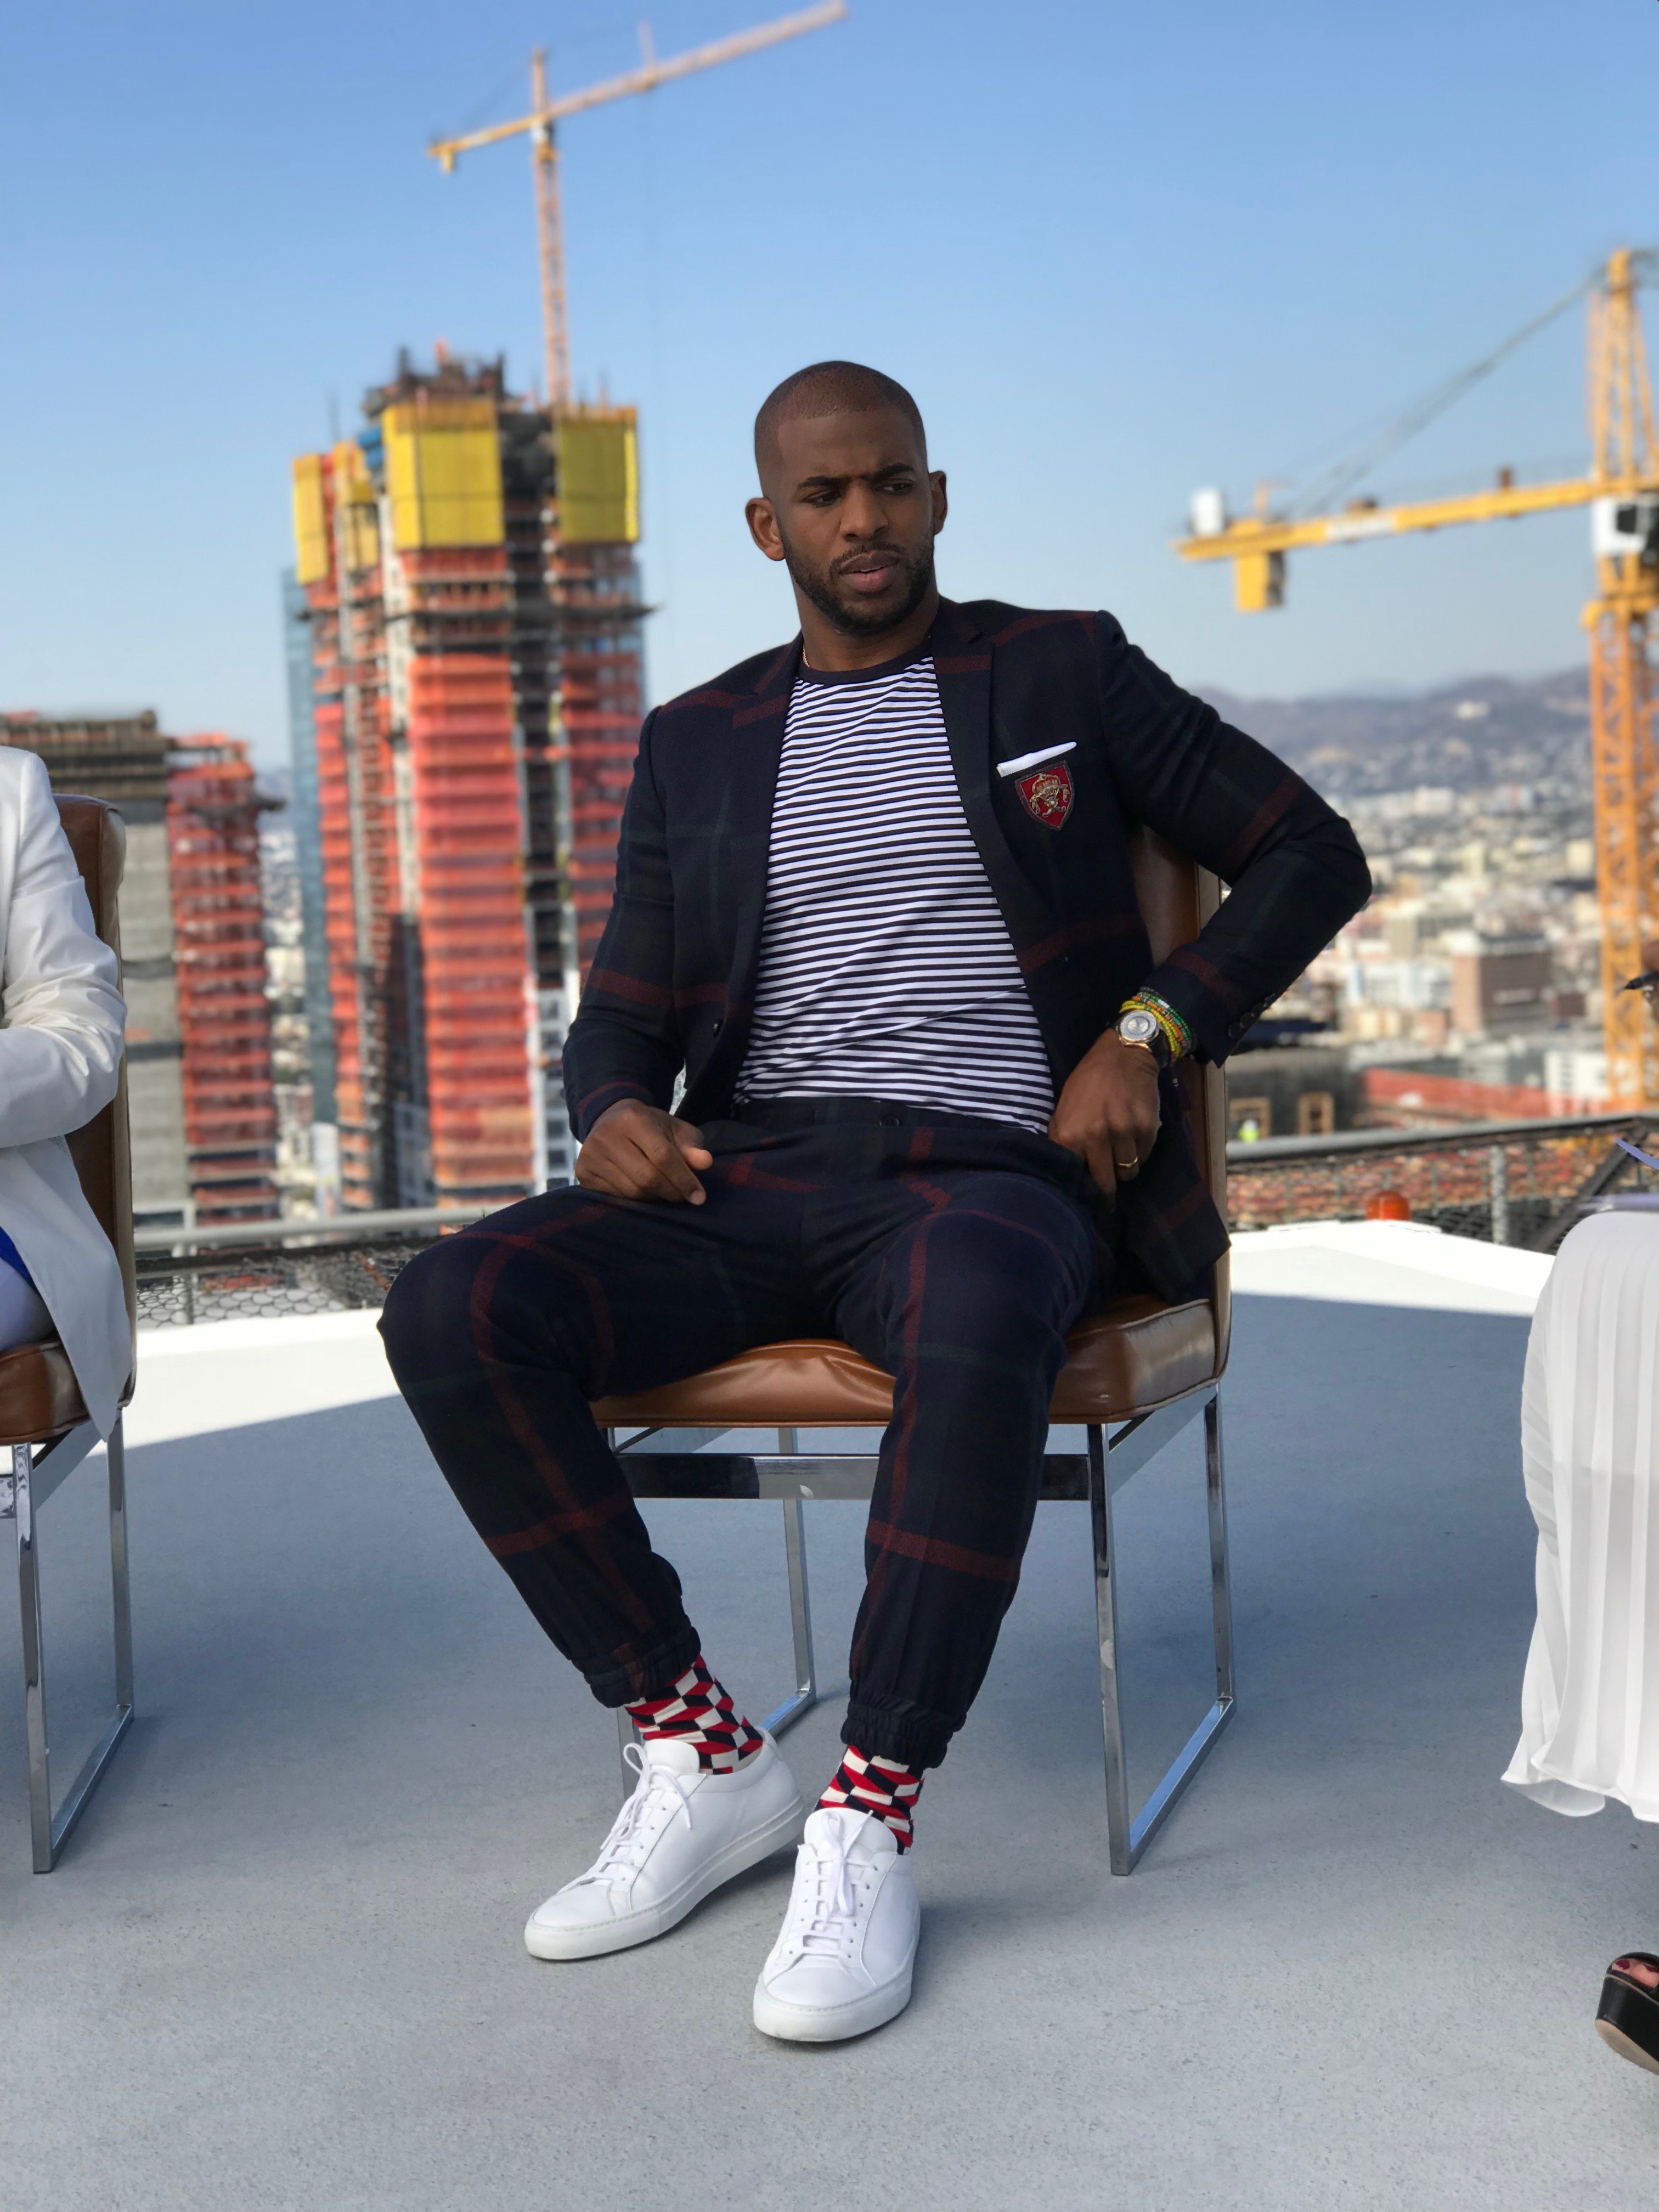 NBA on TNT on X: #NBAAllStar pregame coverage will include a special  Sports & Society roundtable show featuring Dwyane Wade, Chris Paul  & special guests, moderated by Angela Rye! Sunday at 7pm